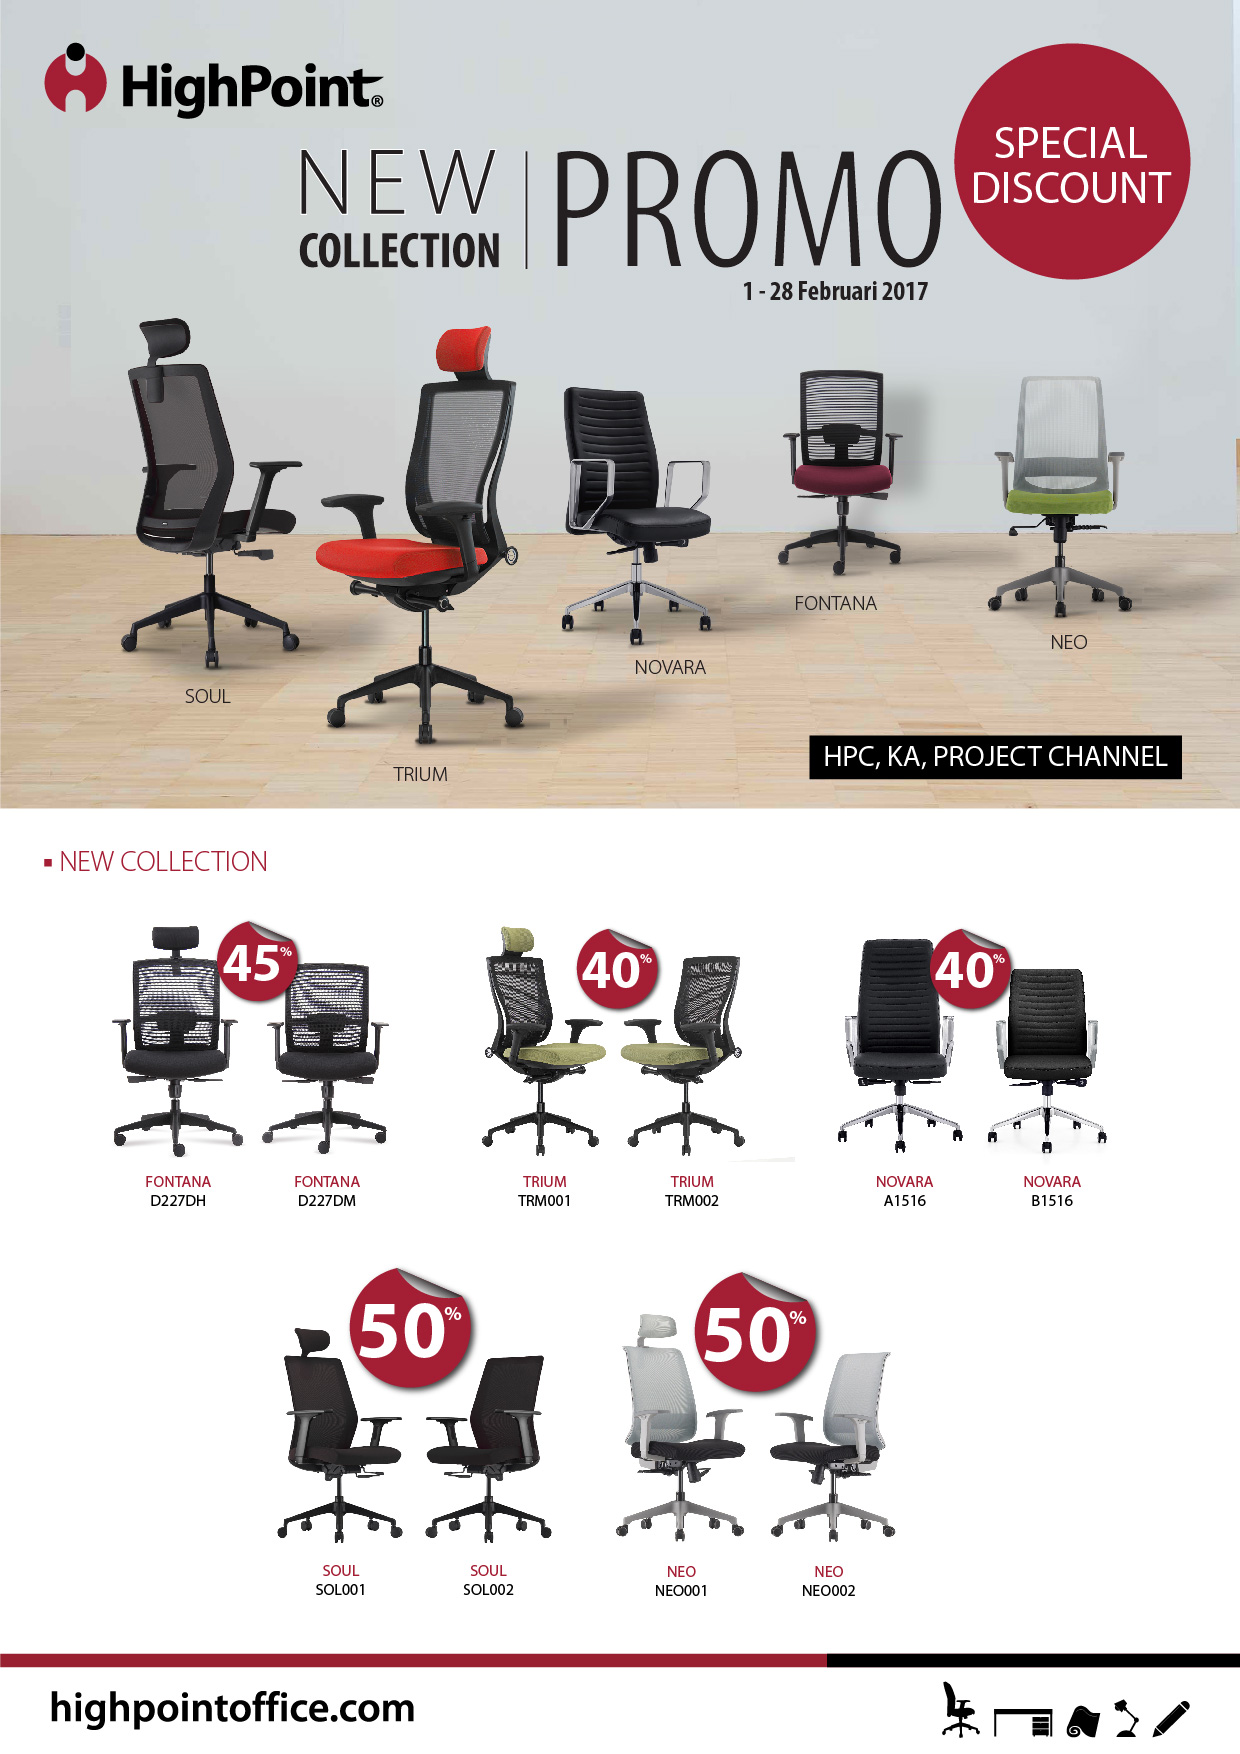 promo-new-chair_hpc-project